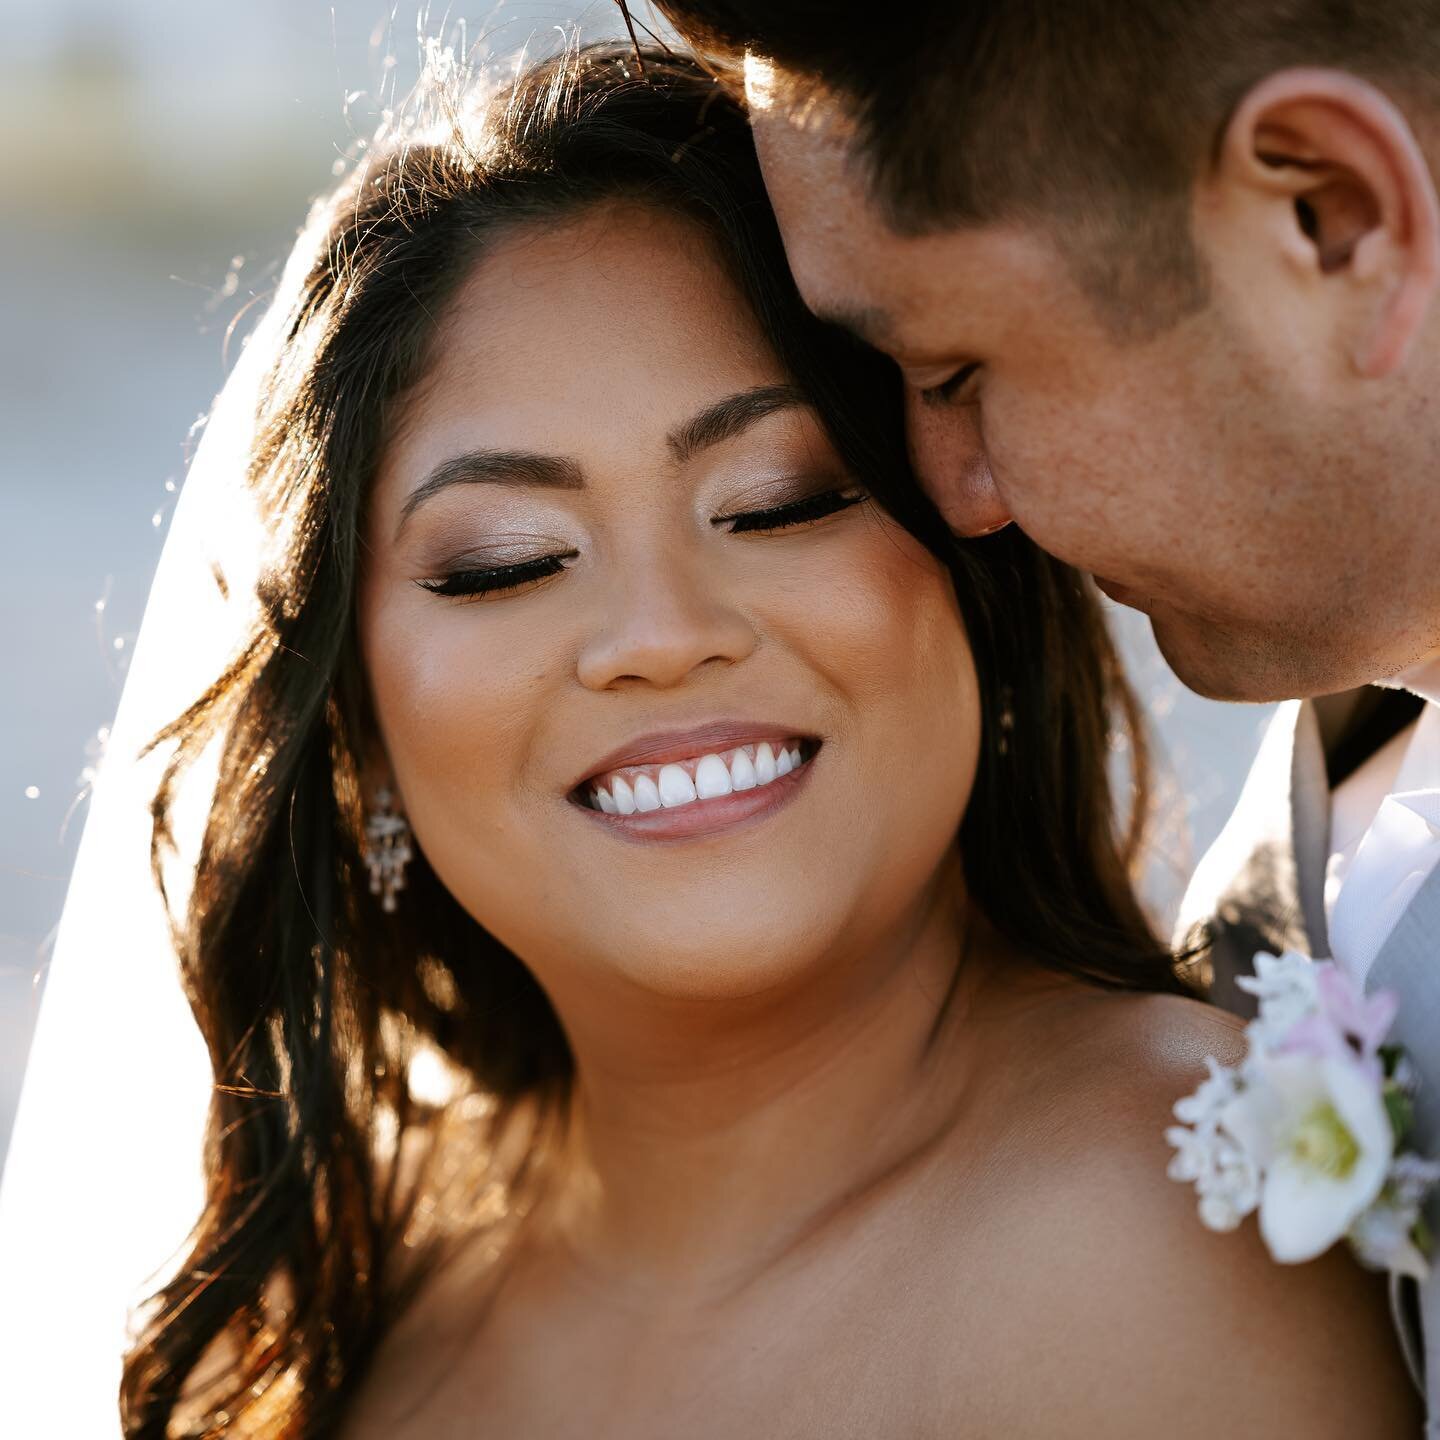 Candice + Kevin 

Bride: @candzp
Groom: @kwu1110
Photography + Film: @the_wild_eyed
Planner/Designer: @micromiami 
Venue: Chateau de la Mer by @beachhousesinparadise 
Hair + Makeup: @kaylaanne_flores
Live Musicians/Entertainment: @cat_carlos_live
Flo